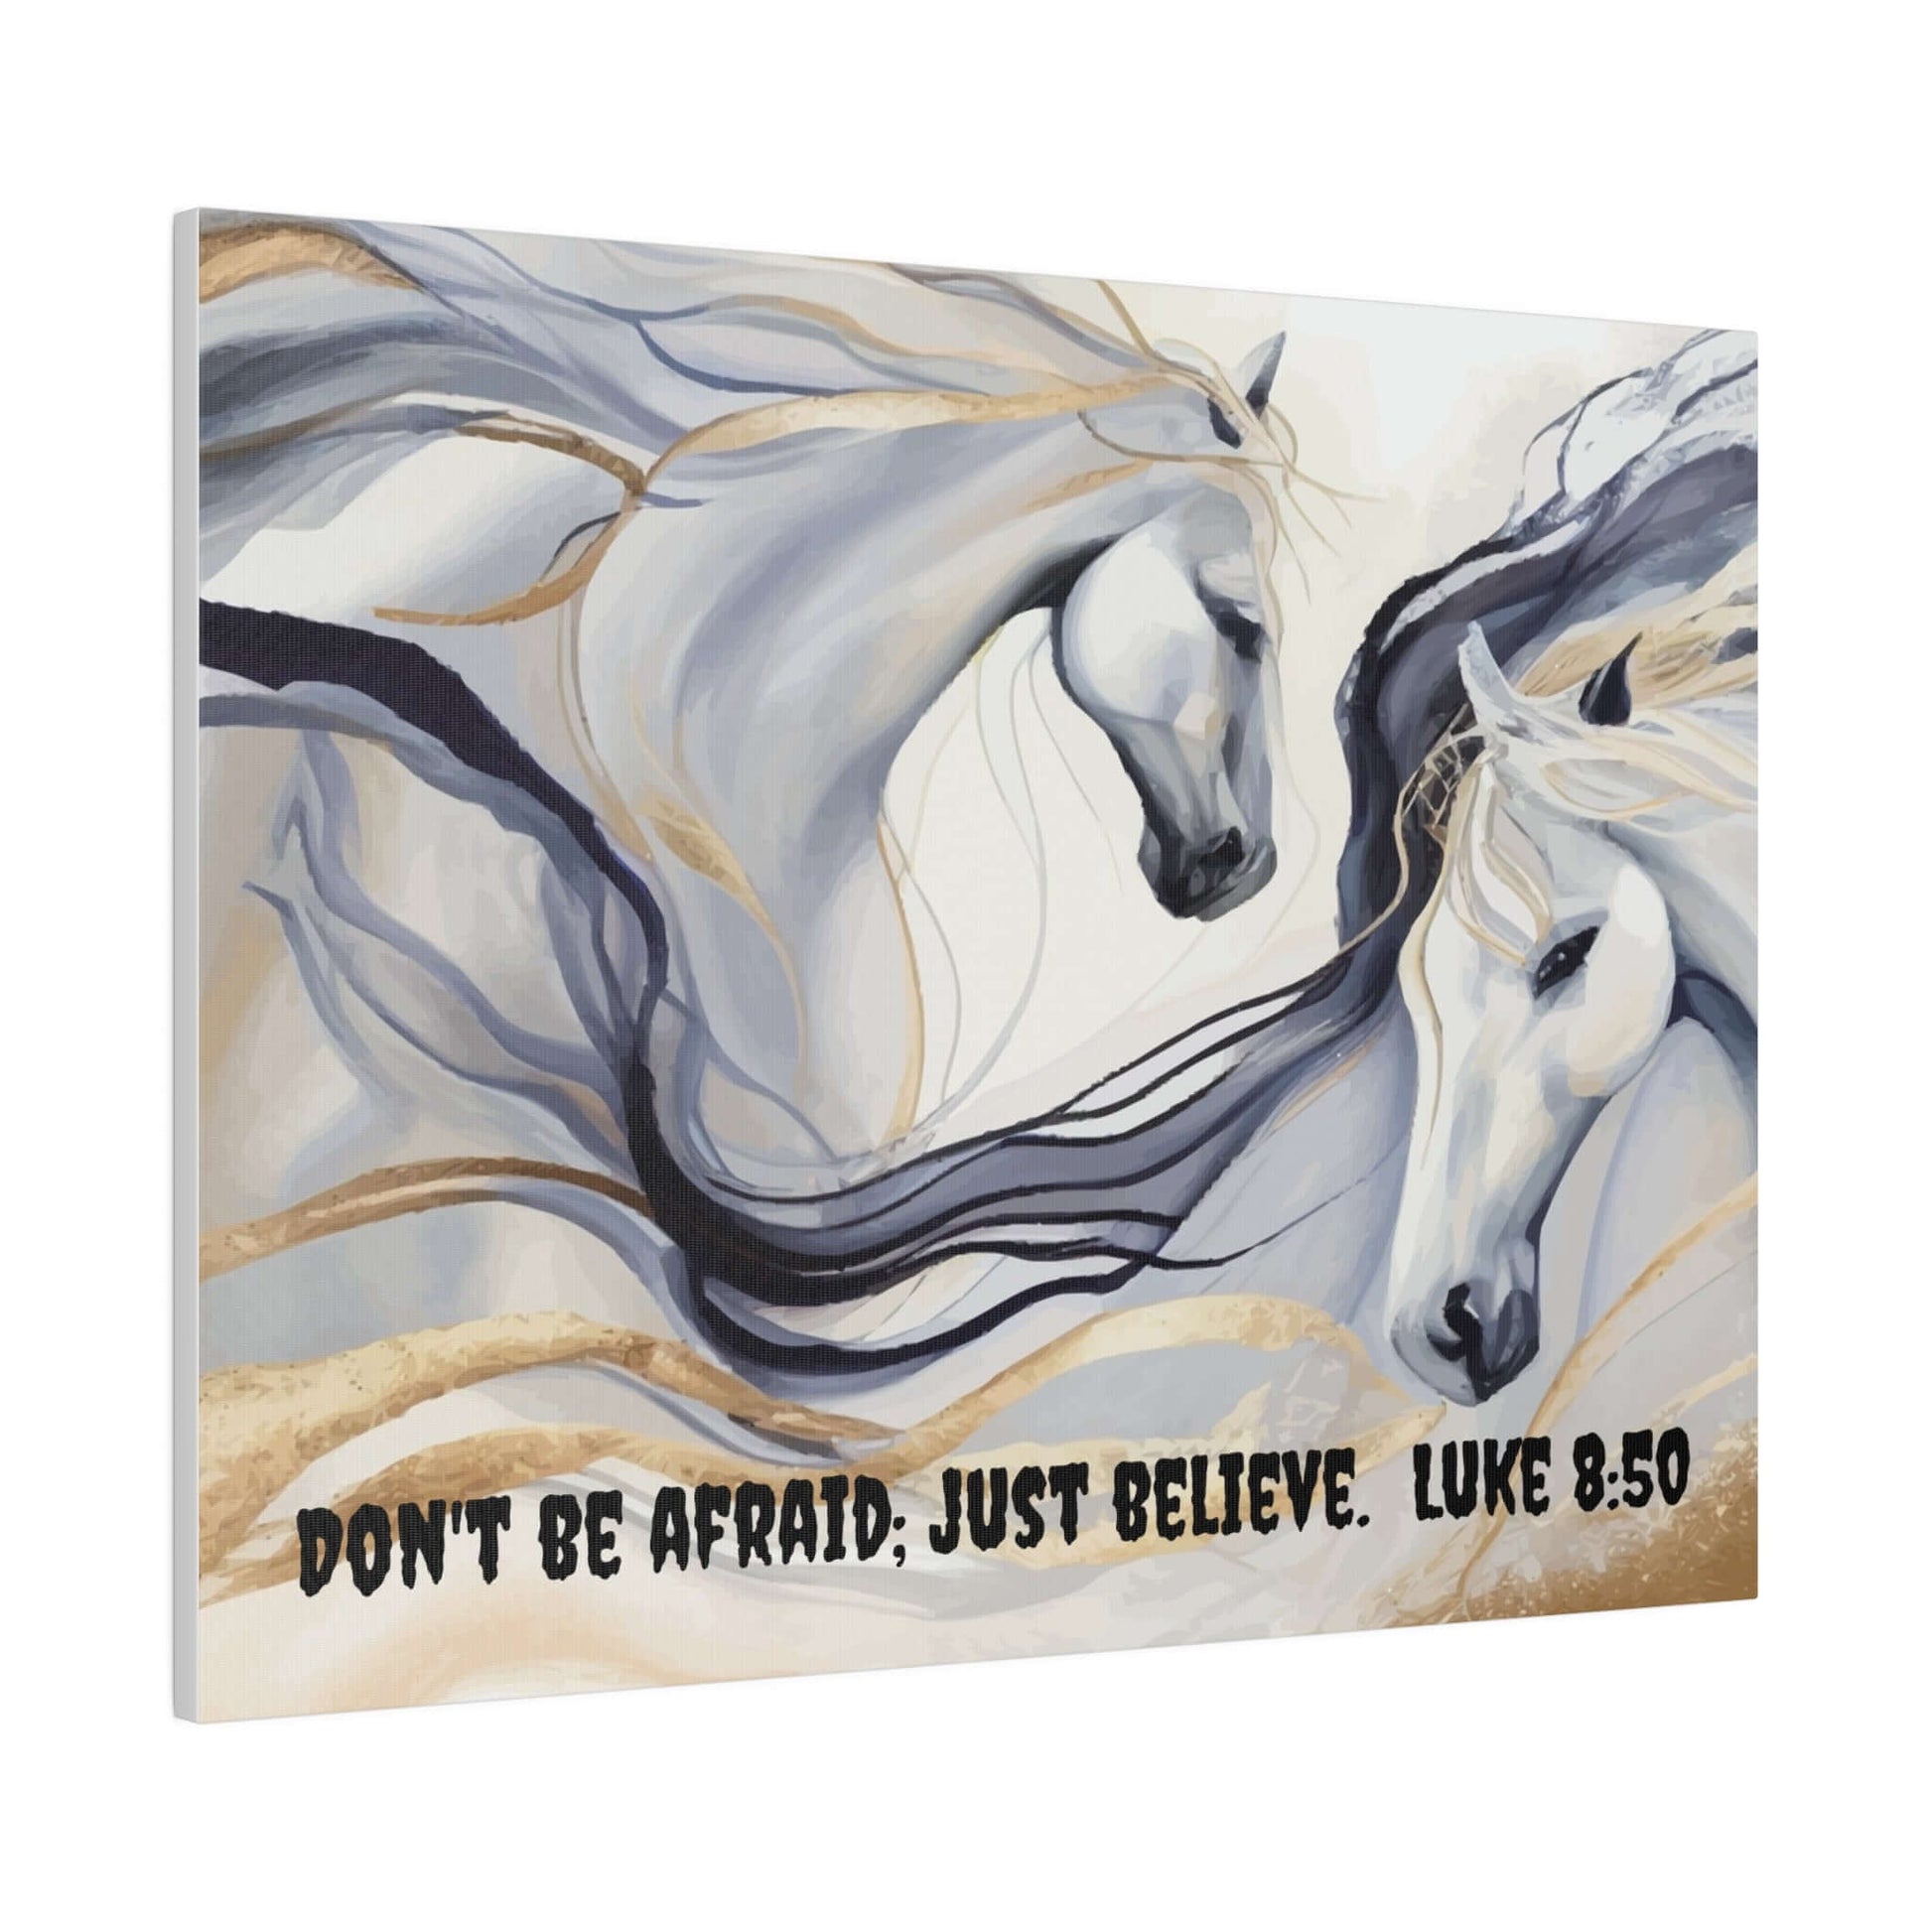 Modern Canvas Wall Art with Luke 8:50 - Eco-Friendly Unframed Art | Art & Wall Decor,Canvas,Decor,Eco-friendly,Hanging Hardware,Holiday Picks,Home & Living,Indoor,Matte,Seasonal Picks,Sustainable,Wall,Wood